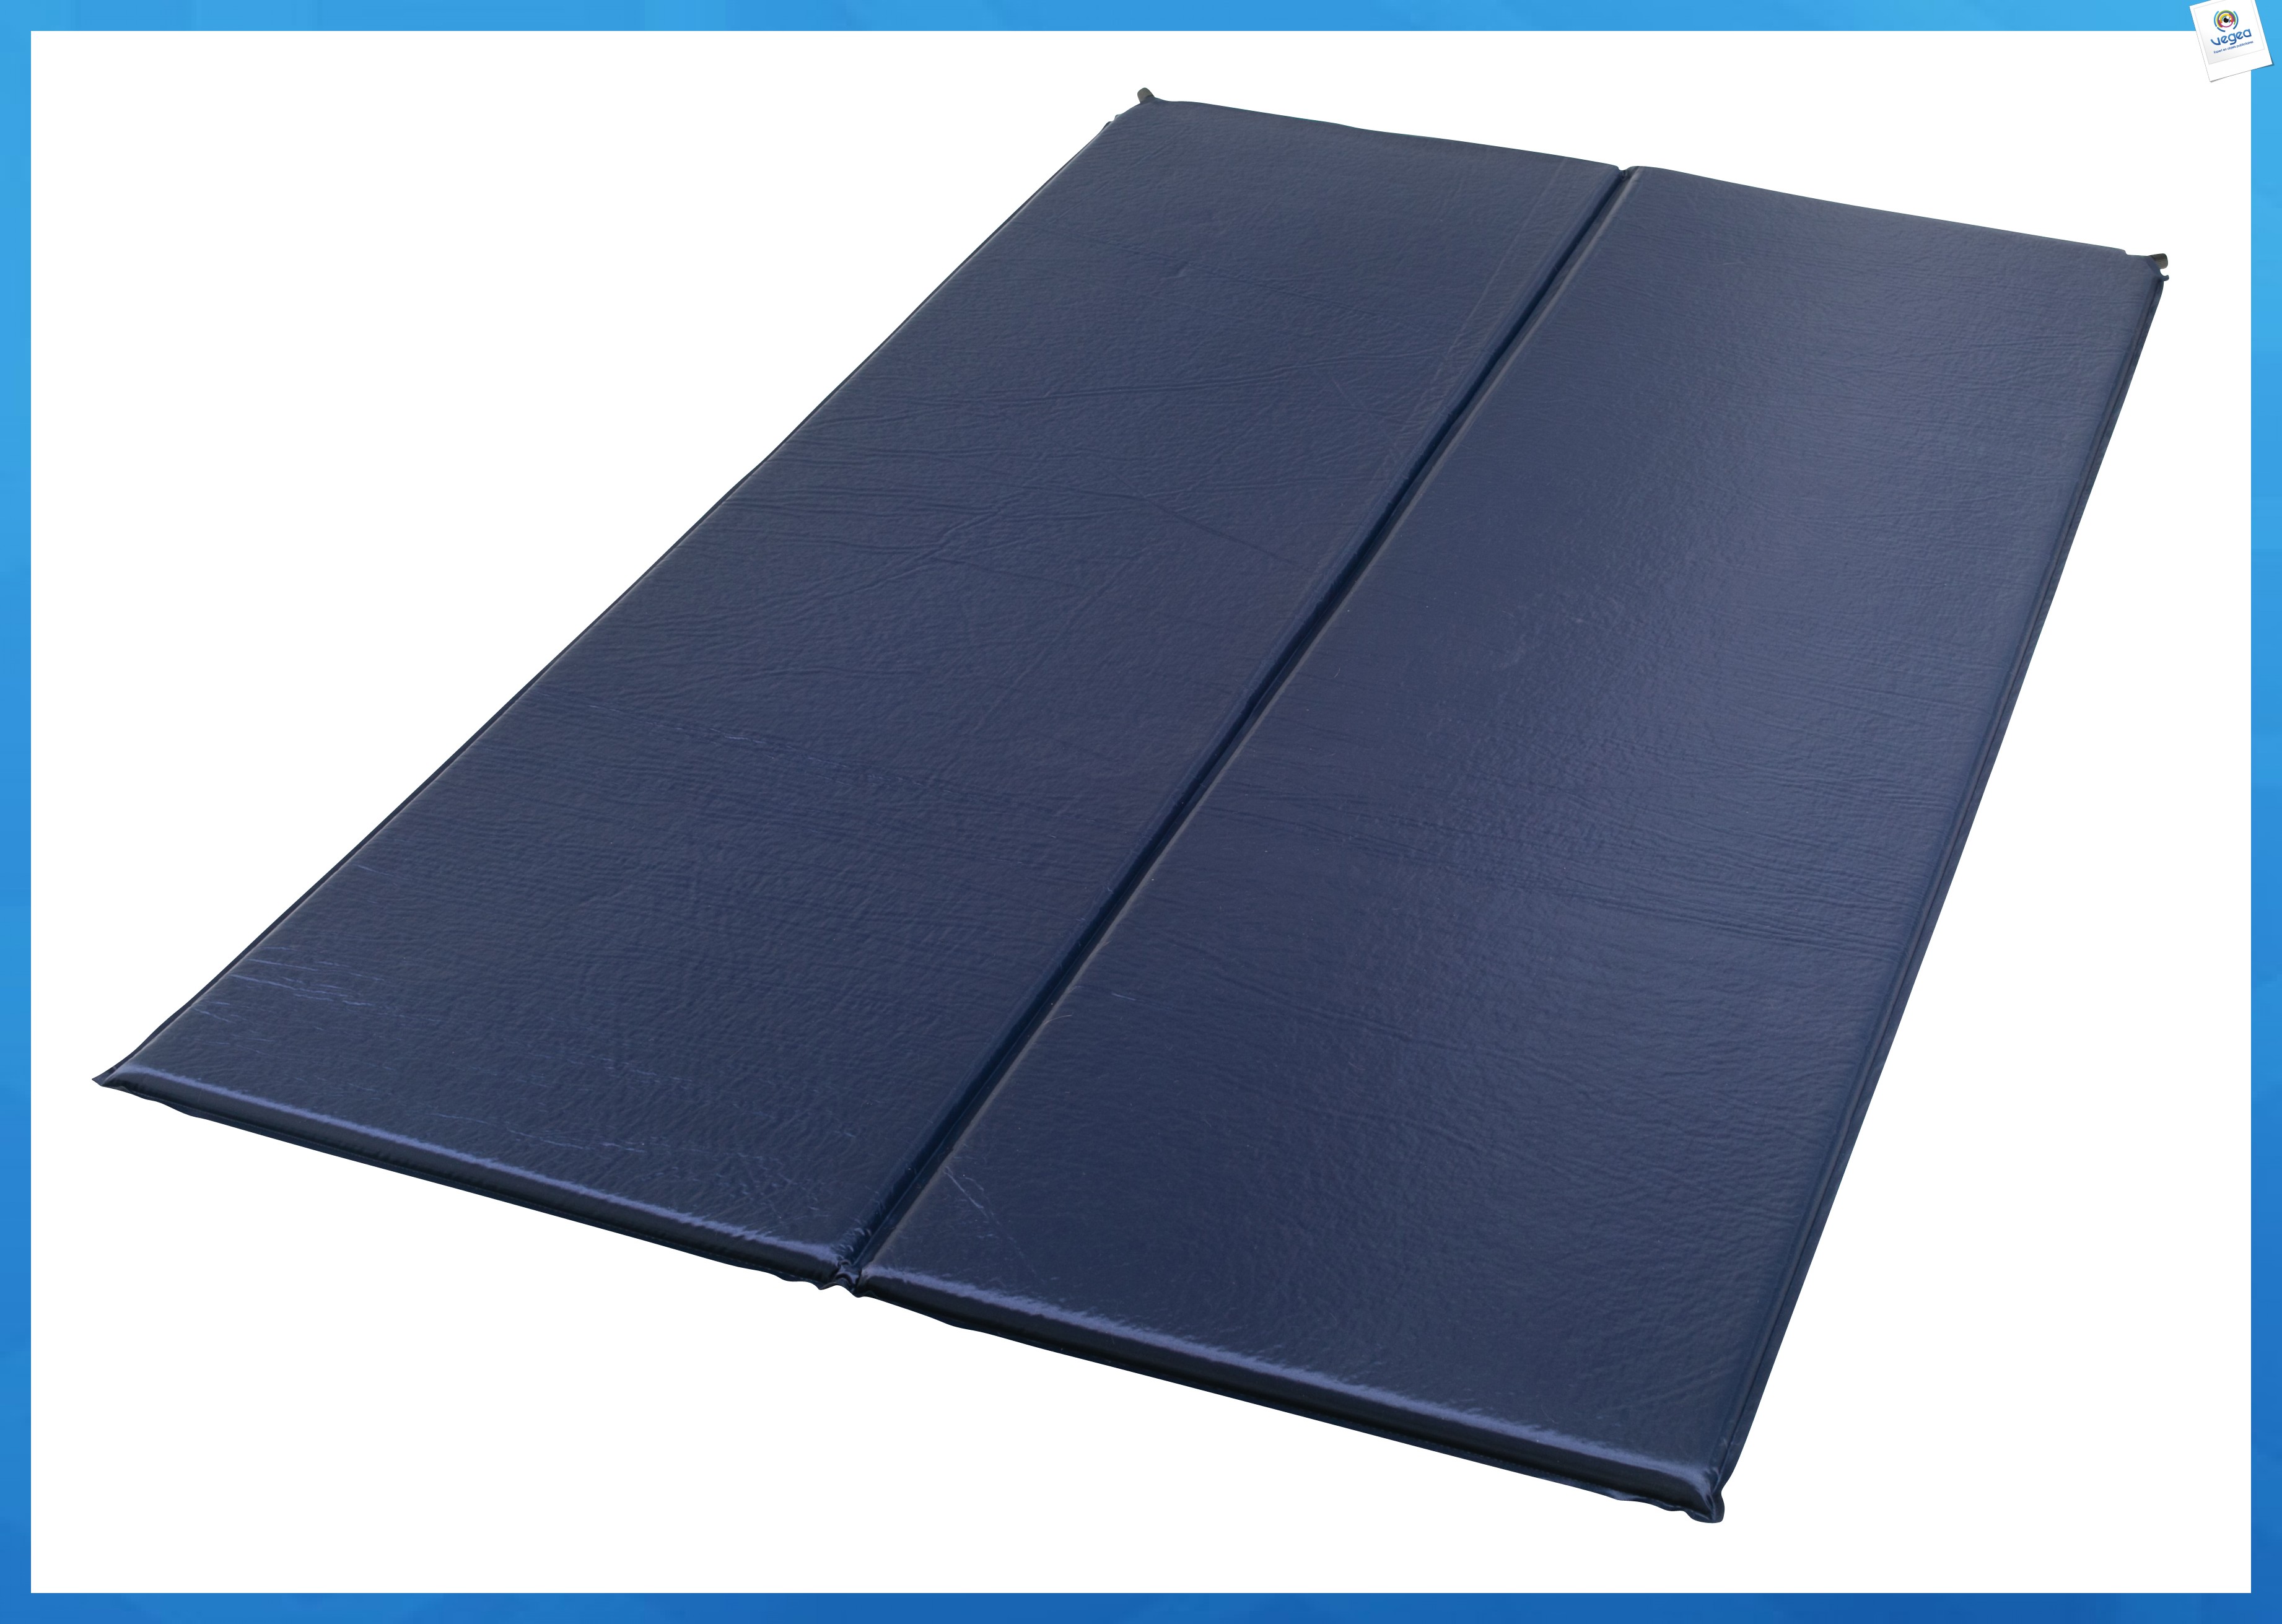 double size self inflating mattress